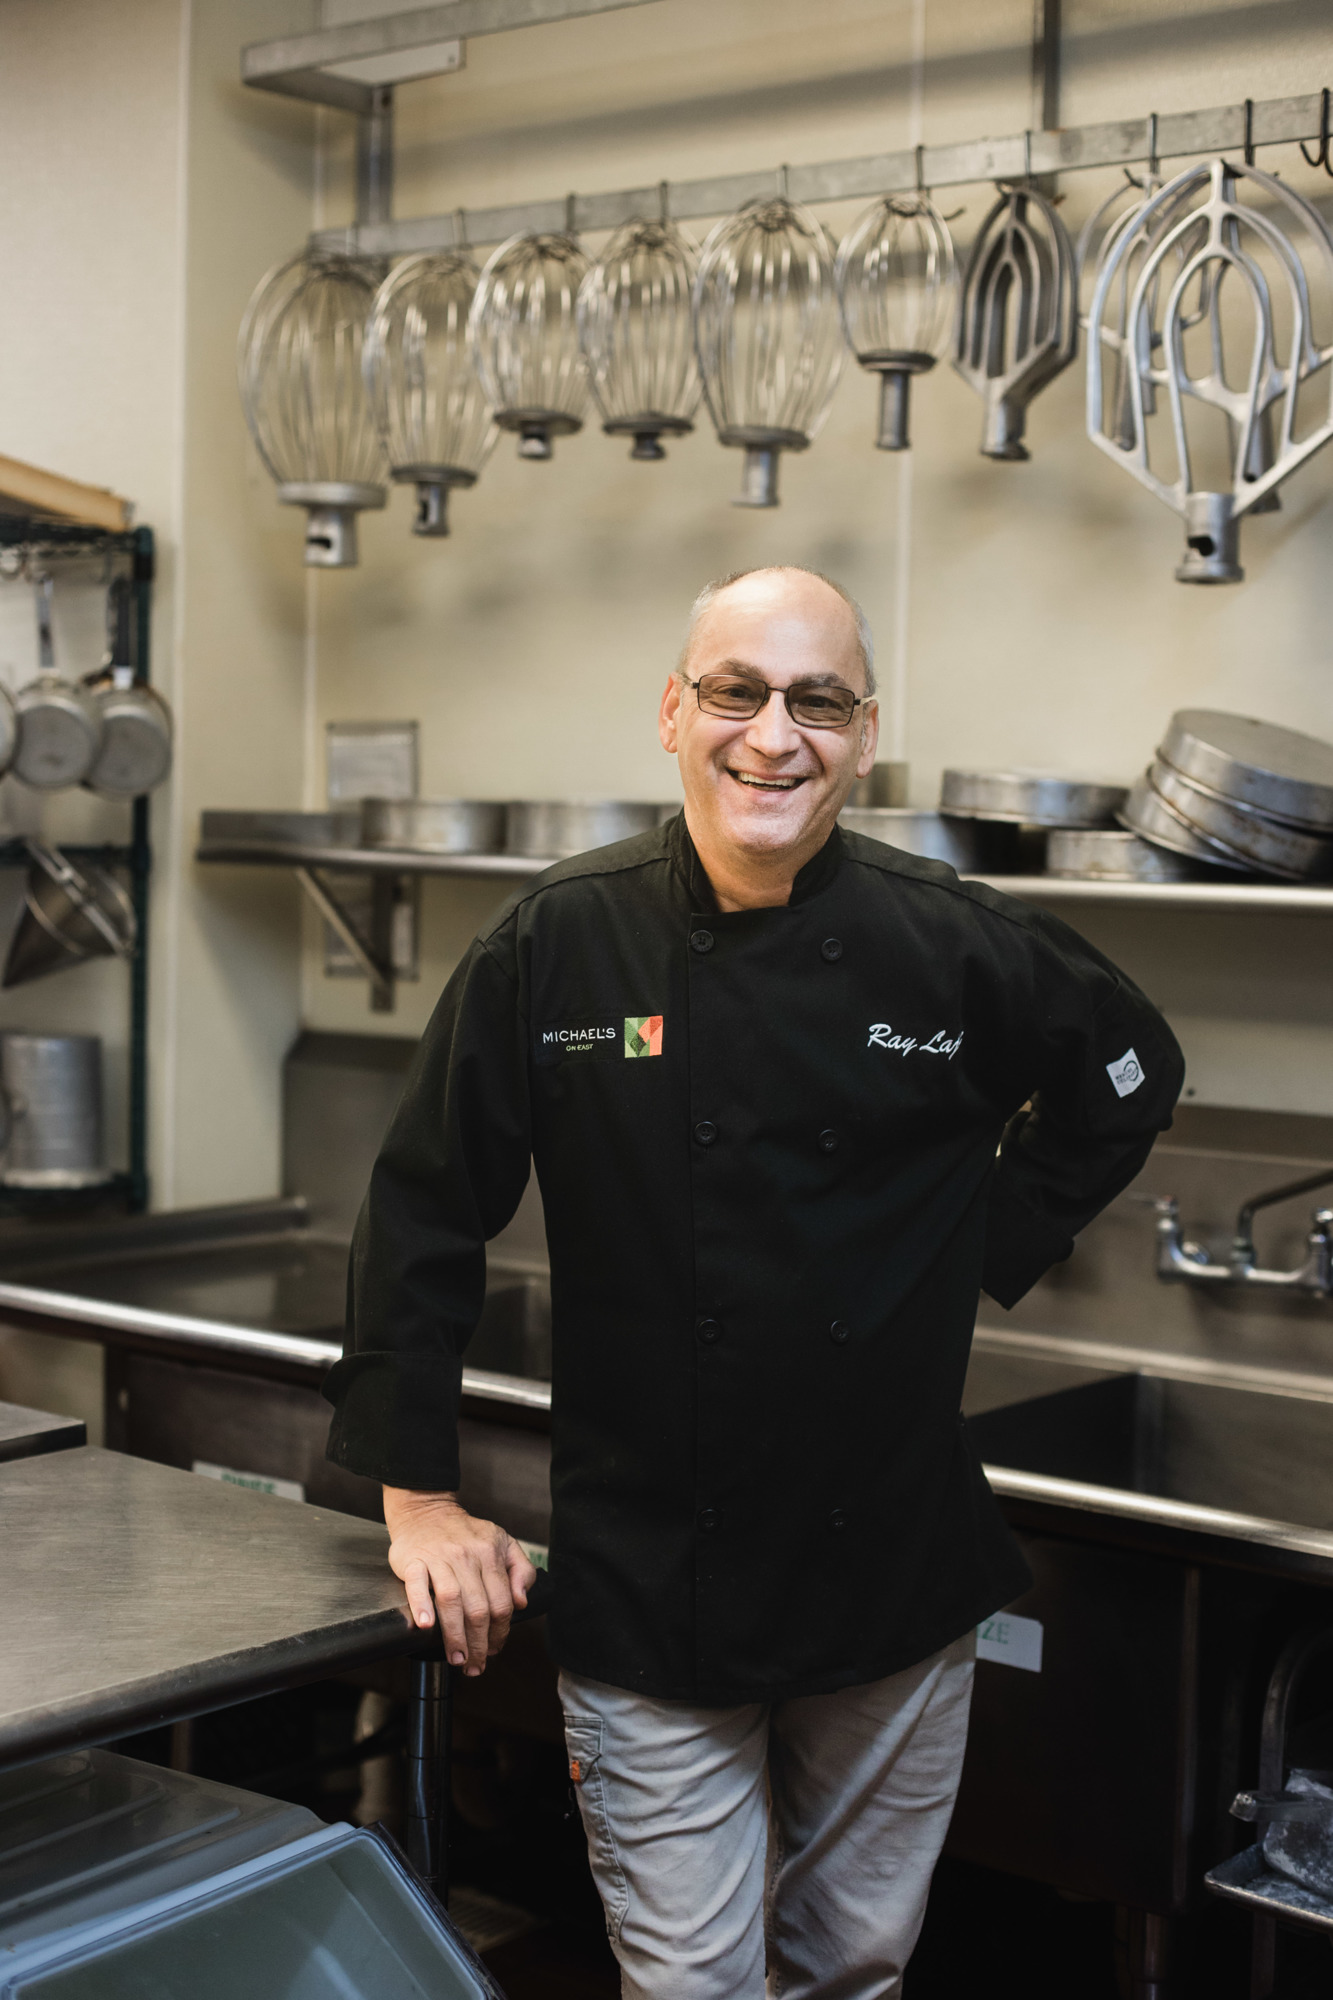 Chef Ray Lajoie is the pastry chef at Michael's On East